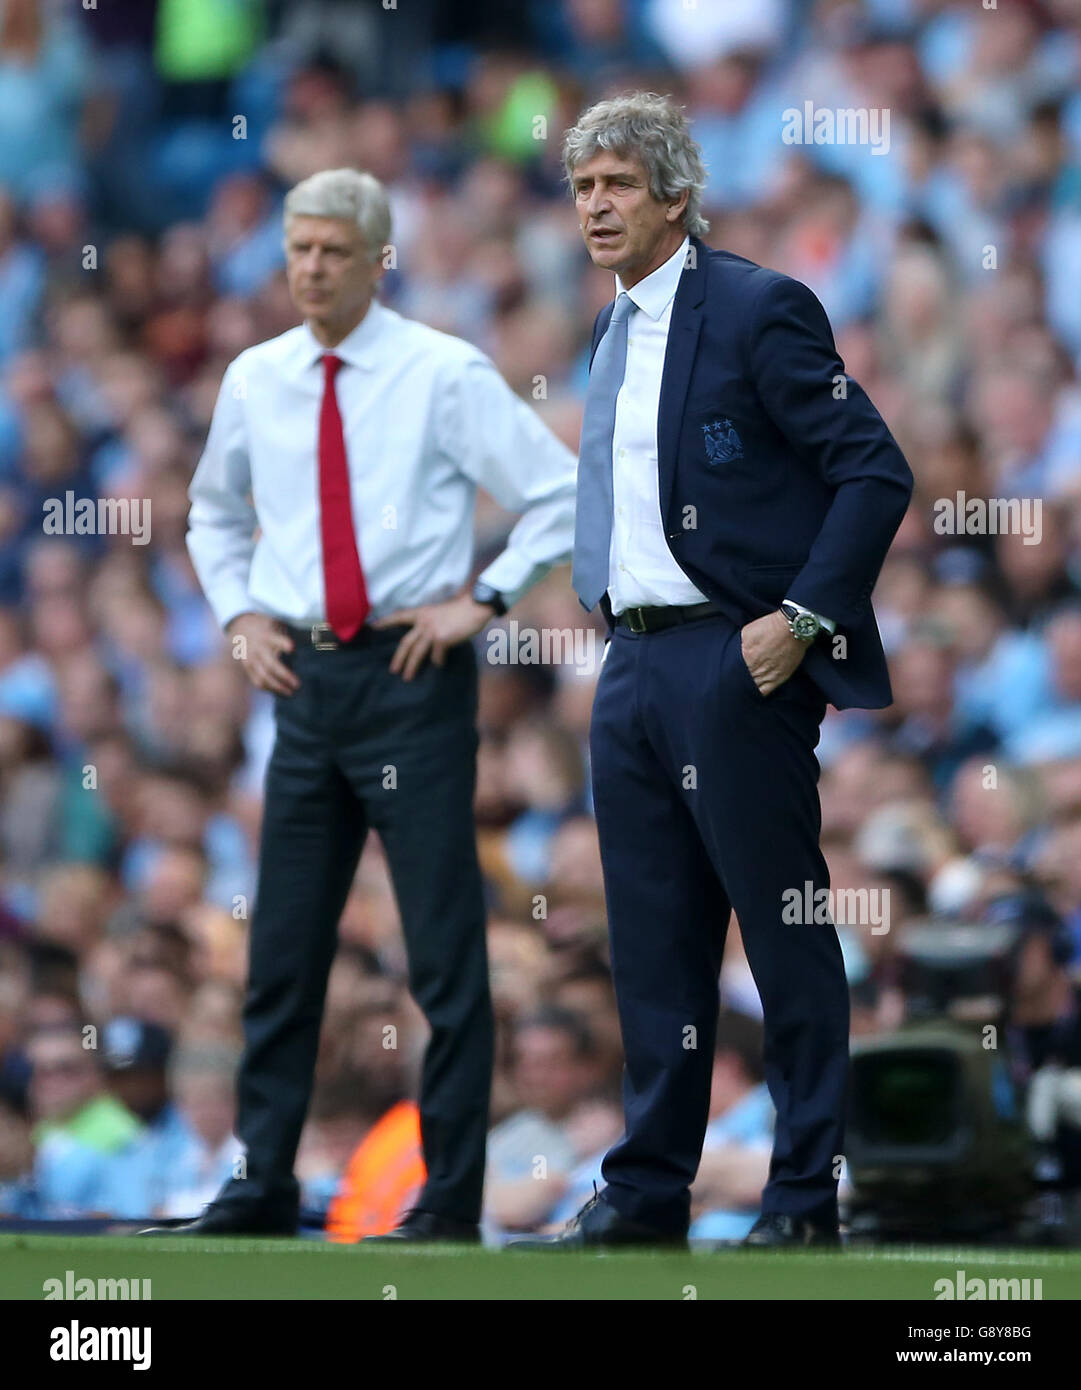 Manchester City manager Manuel Pellegrini (right) with Arsenal manager Arsene Wenger on the touchline during the Barclays Premier League match at the Etihad Stadium, Manchester. Stock Photo